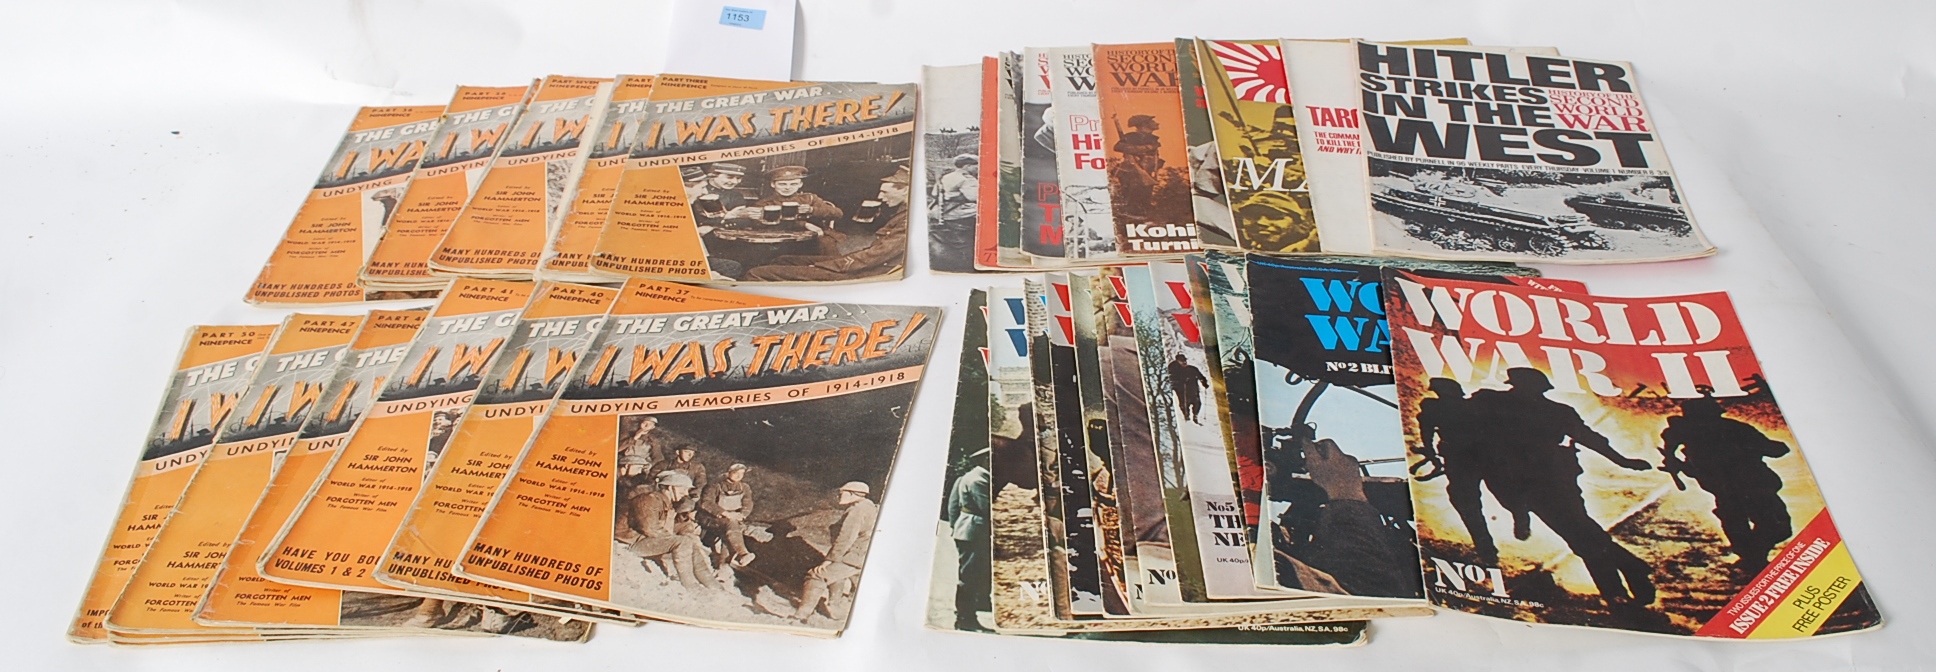 A quantity of WWI I Was There magazines along with a quantity of WWII